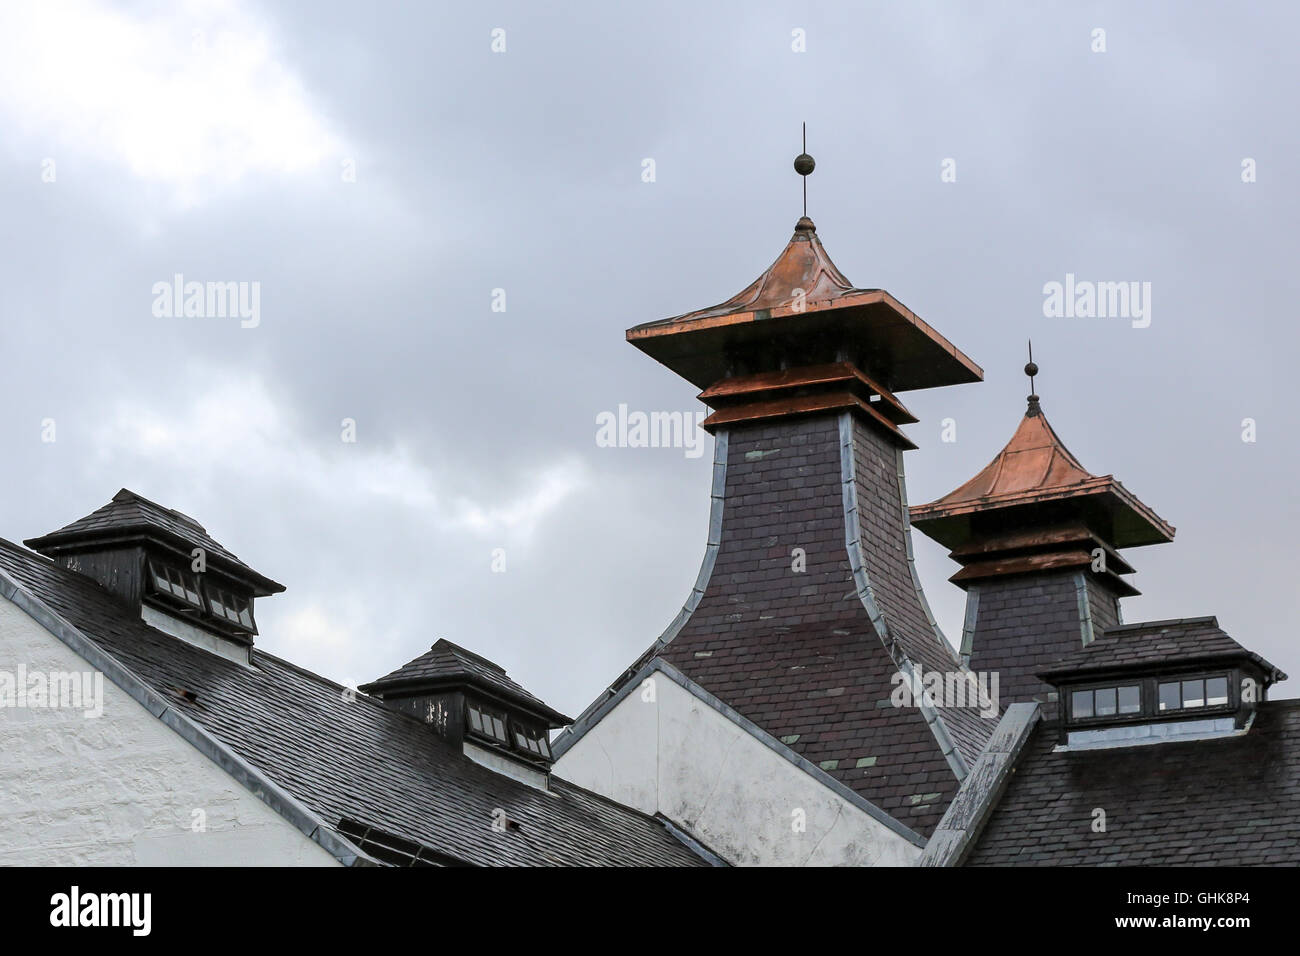 Ventilated pagoda roof from a Scottish whisky distillery. Photo taken on: September 13th, 2015 Stock Photo